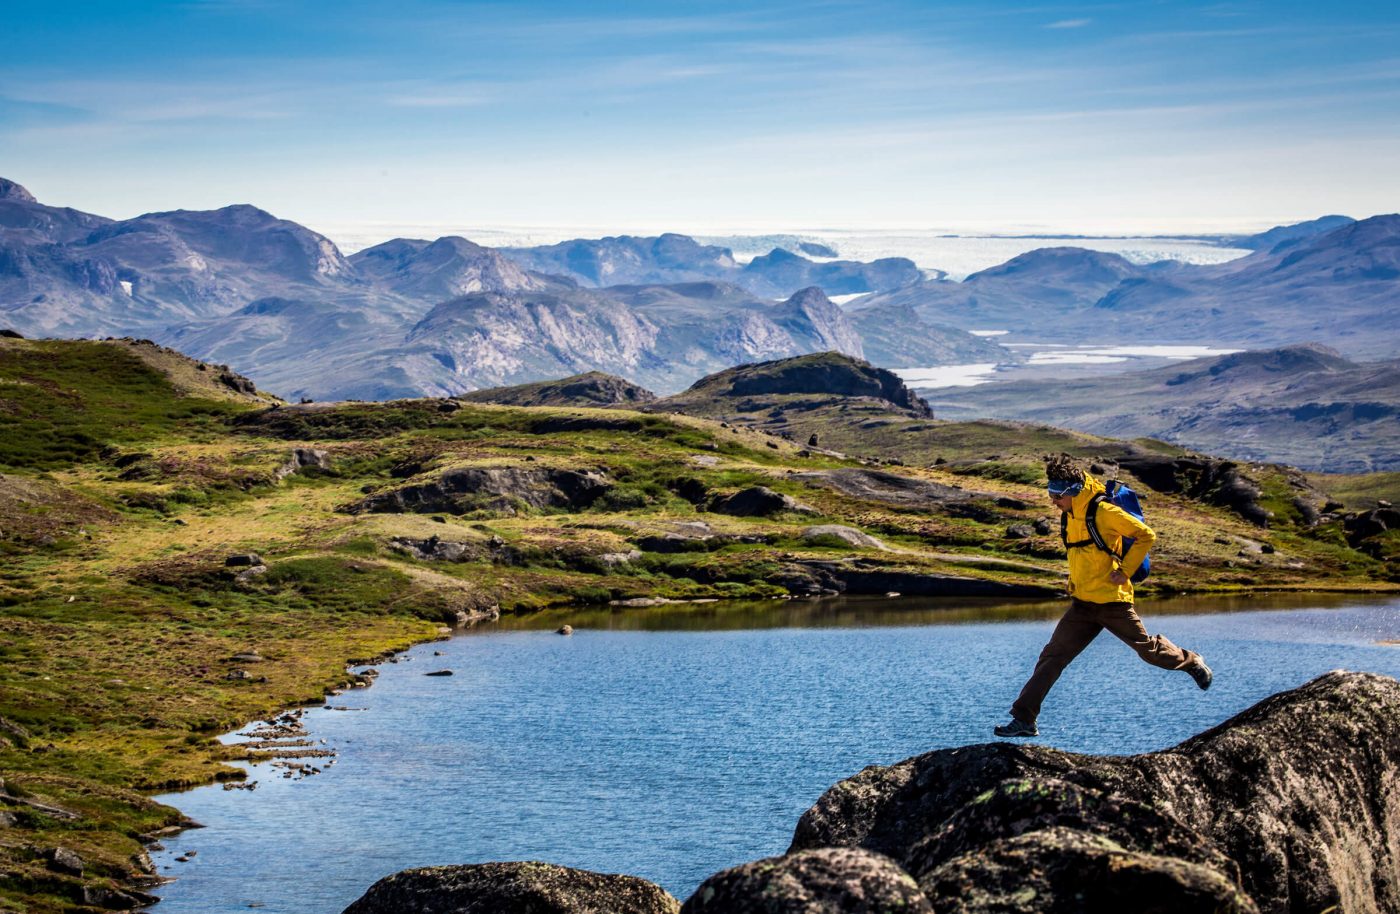 Enthusiastic hiker having fun near the Greenland Ice Sheet along the Arctic Circle. By Raven Eye Photography